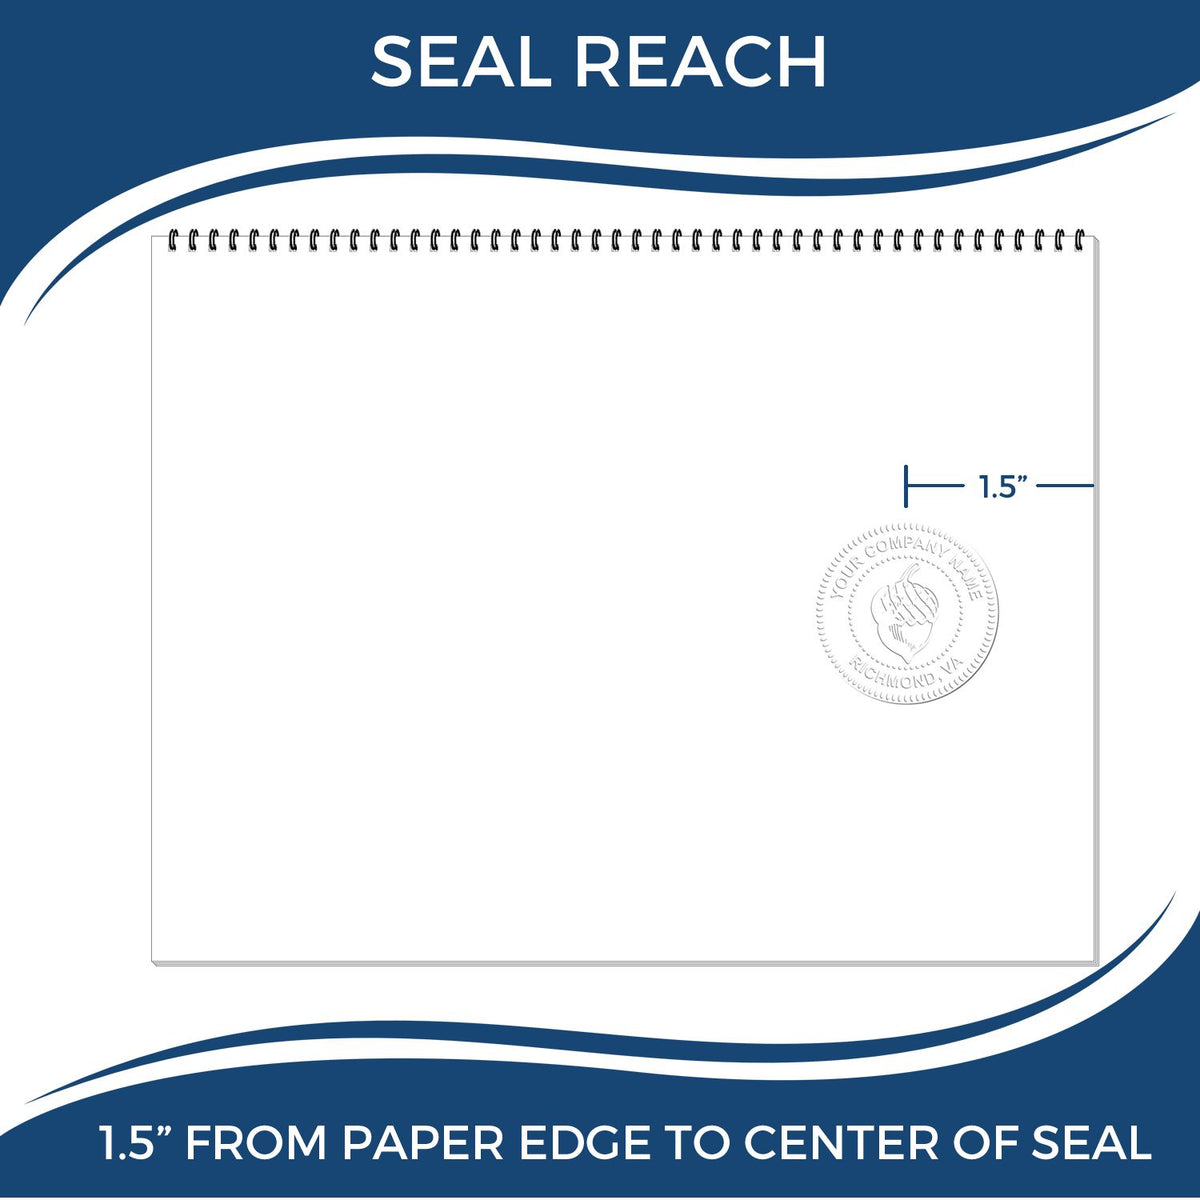 An infographic showing the seal reach which is represented by a ruler and a miniature seal image of the Soft Kansas Professional Engineer Seal